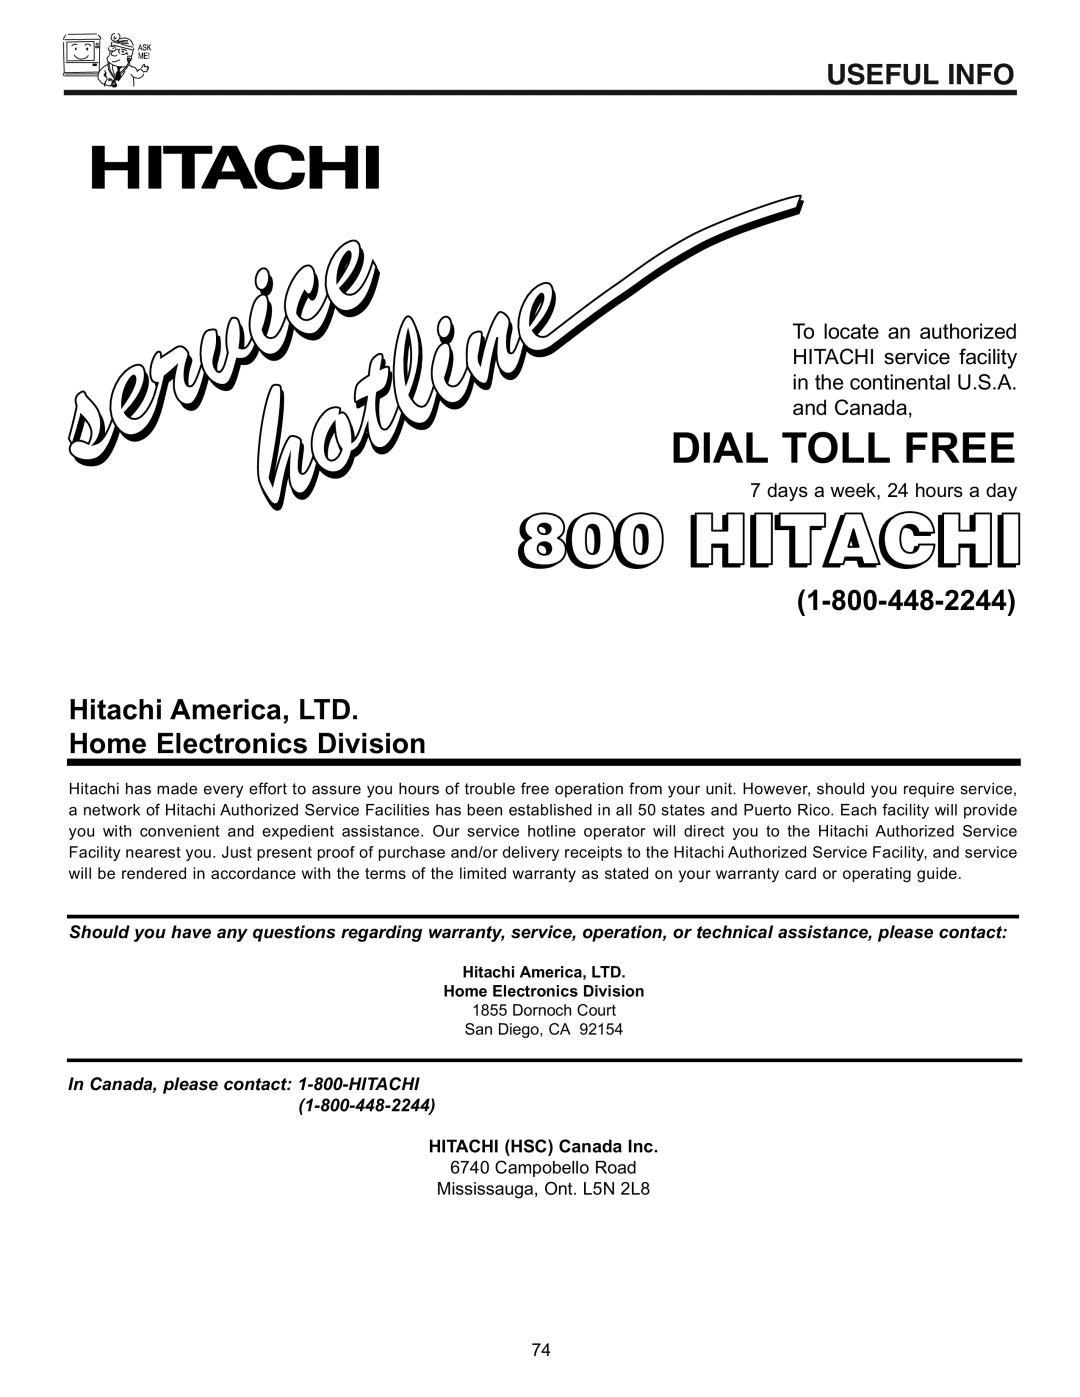 Hitachi 53SWX01W manual Home Electronics Division, Hitachi, Dial Toll Free, Useful Info, days a week, 24 hours a day 